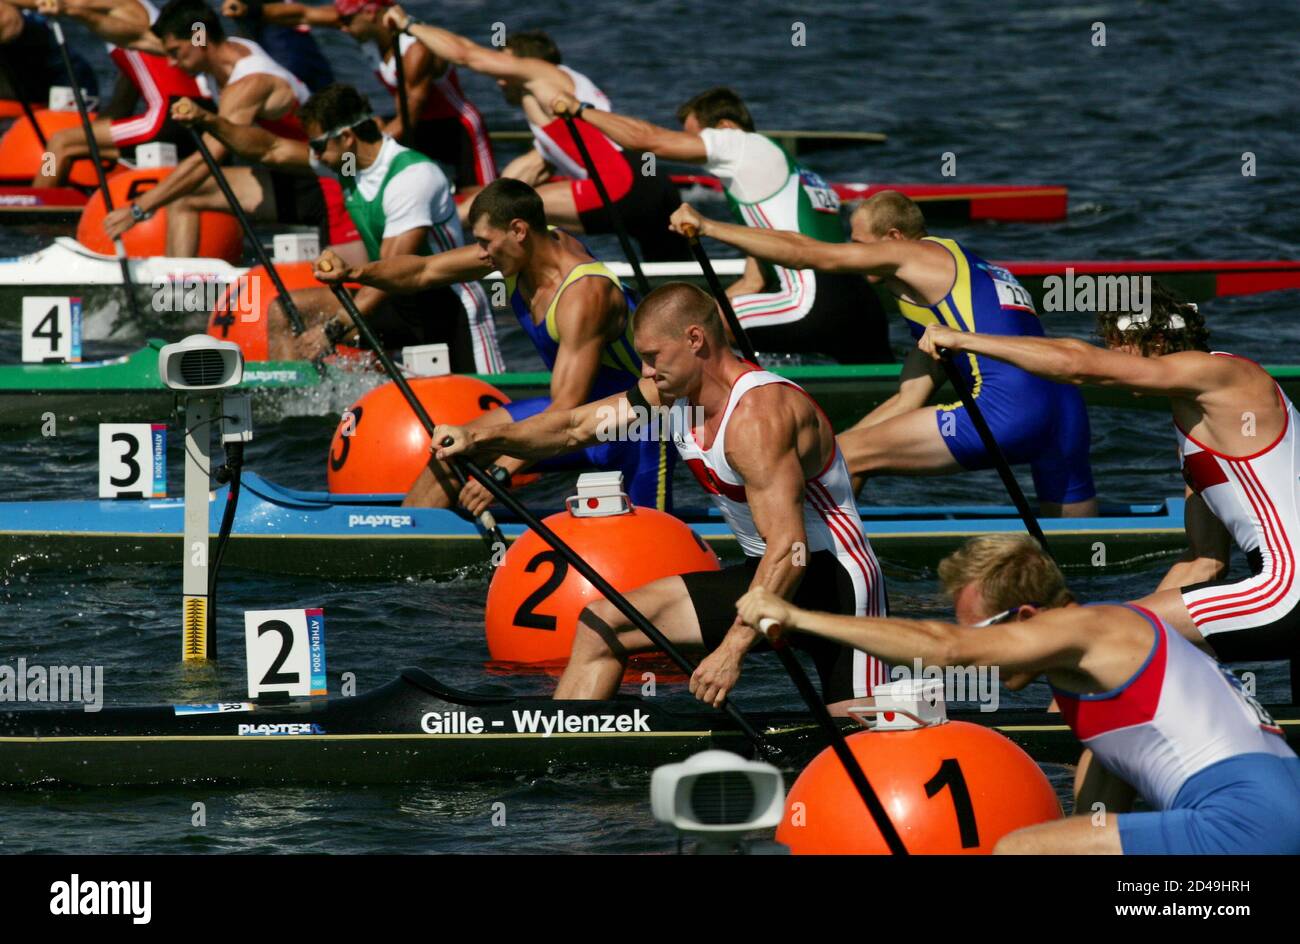 Olympic men canoe team from ( front to back ) U.S., Germany, Ukraine, Hungary, Poland, Canada and Slovakia compete in the heat of the men's C2 canoe flatwater race during the Athens 2004 Olympic Summer Games August 24, 2004. Stock Photo